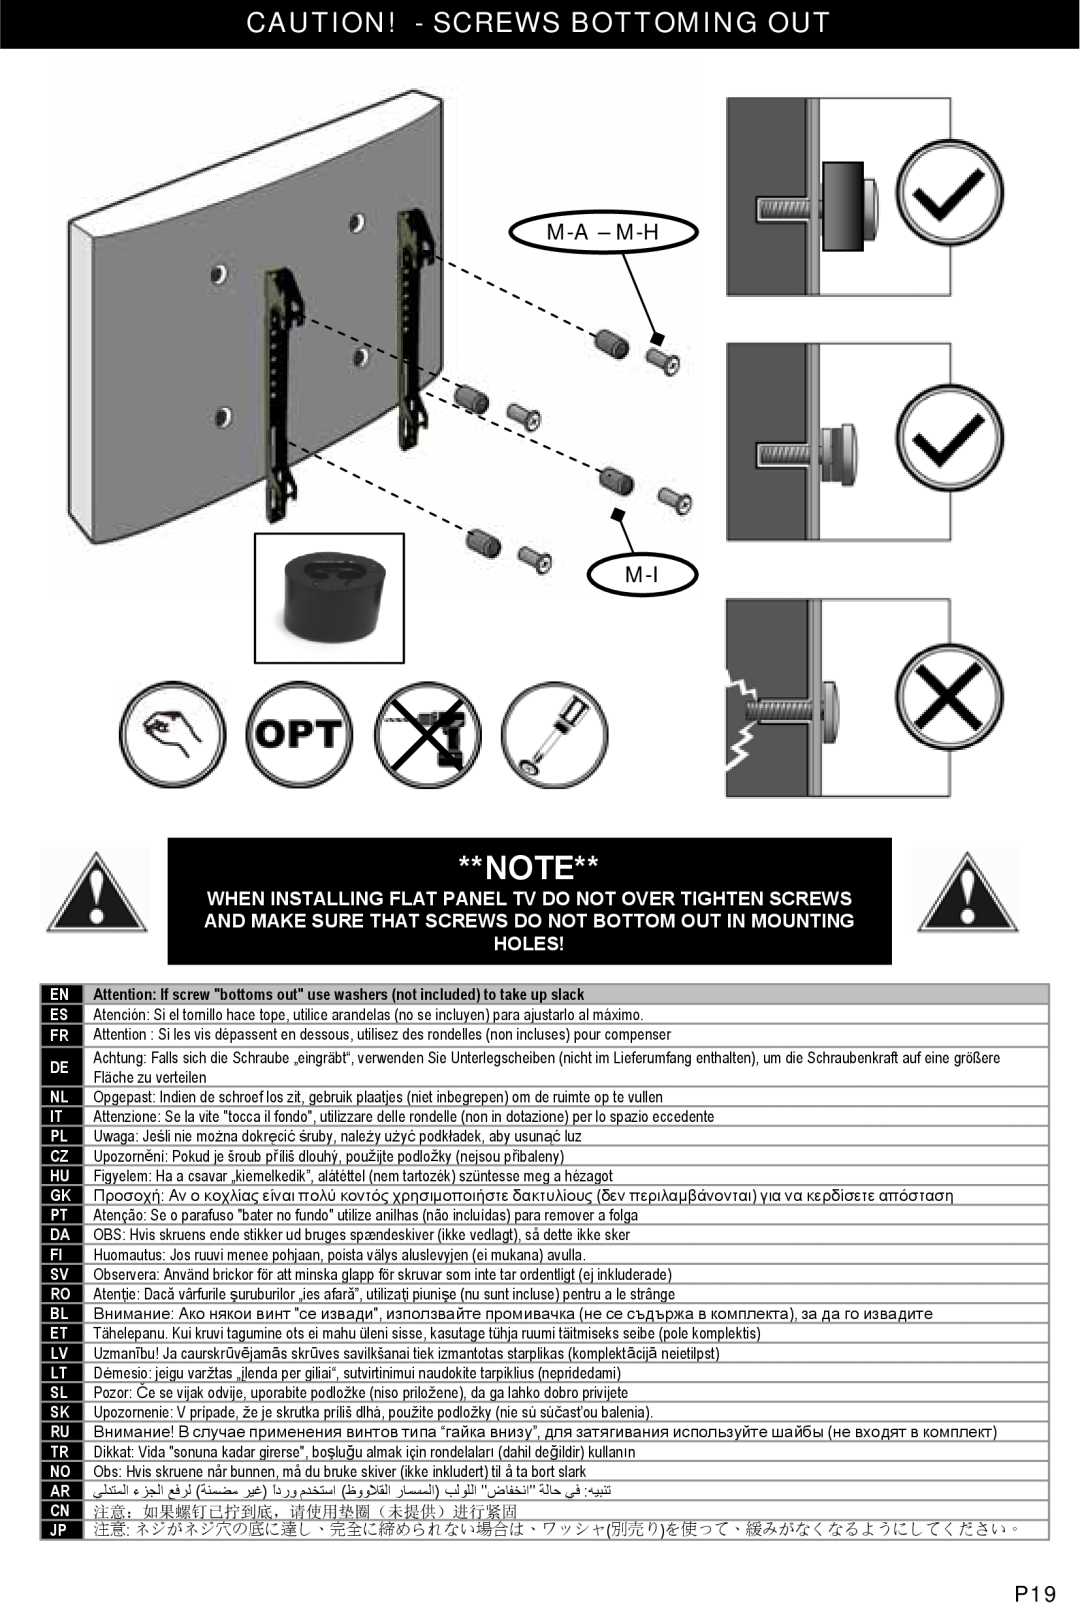 Omnimount OM10044, U2-F manual Caution! - Screws Bottoming Out, M-A - M-H M-I 